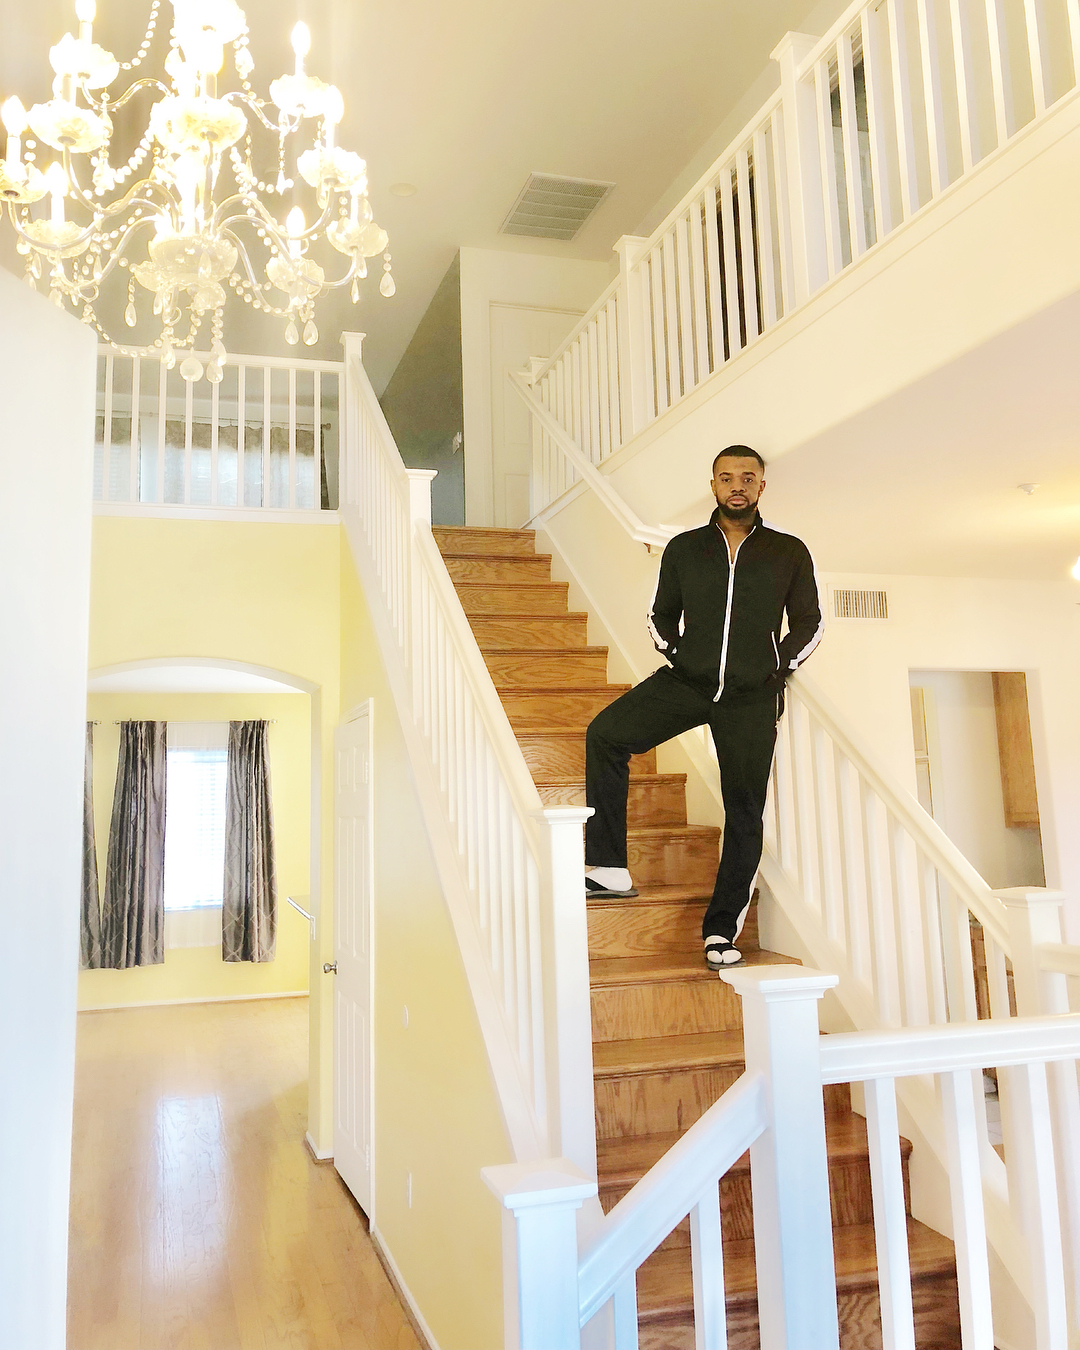 Williams Uchemba acquires new home